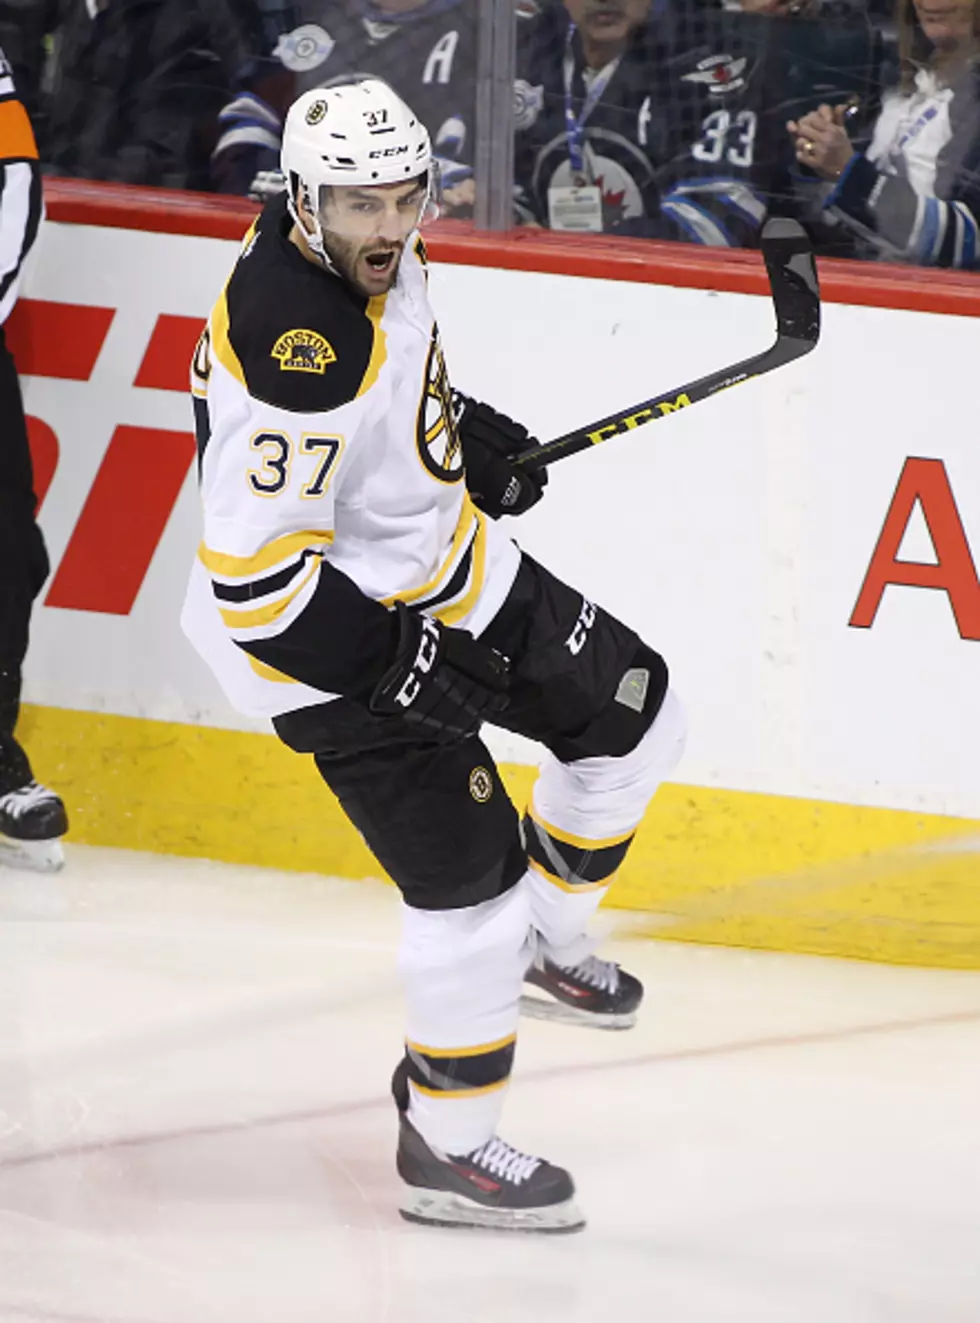 Bergy, Marchand Lead Bruins Past Jets [VIDEO]